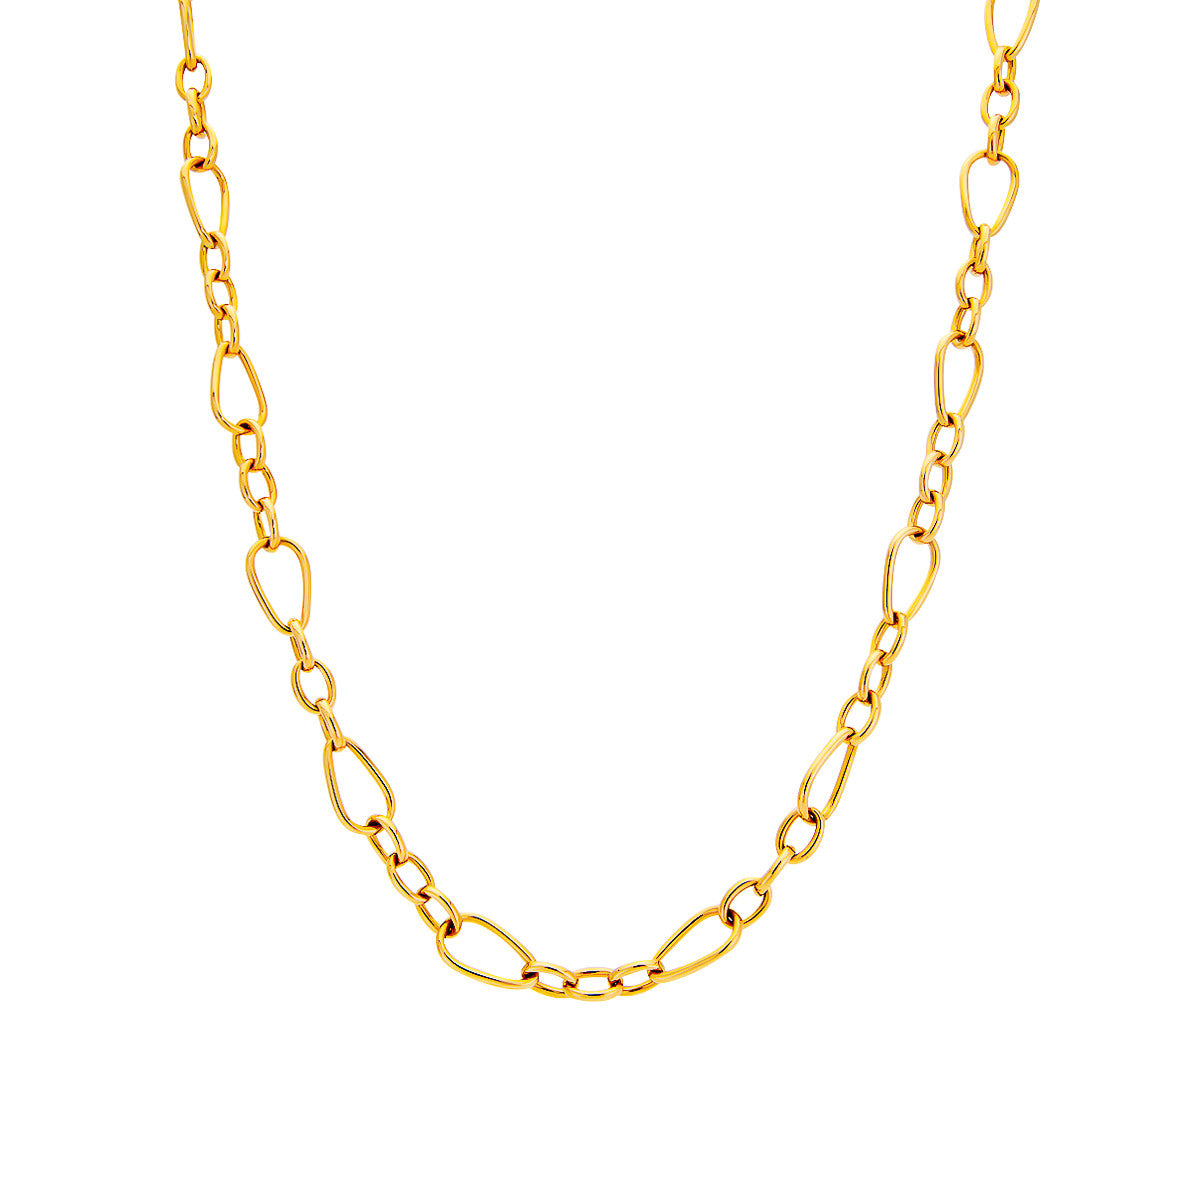 Roberto Coin Designer Gold 18K Yellow Gold Chain Necklace